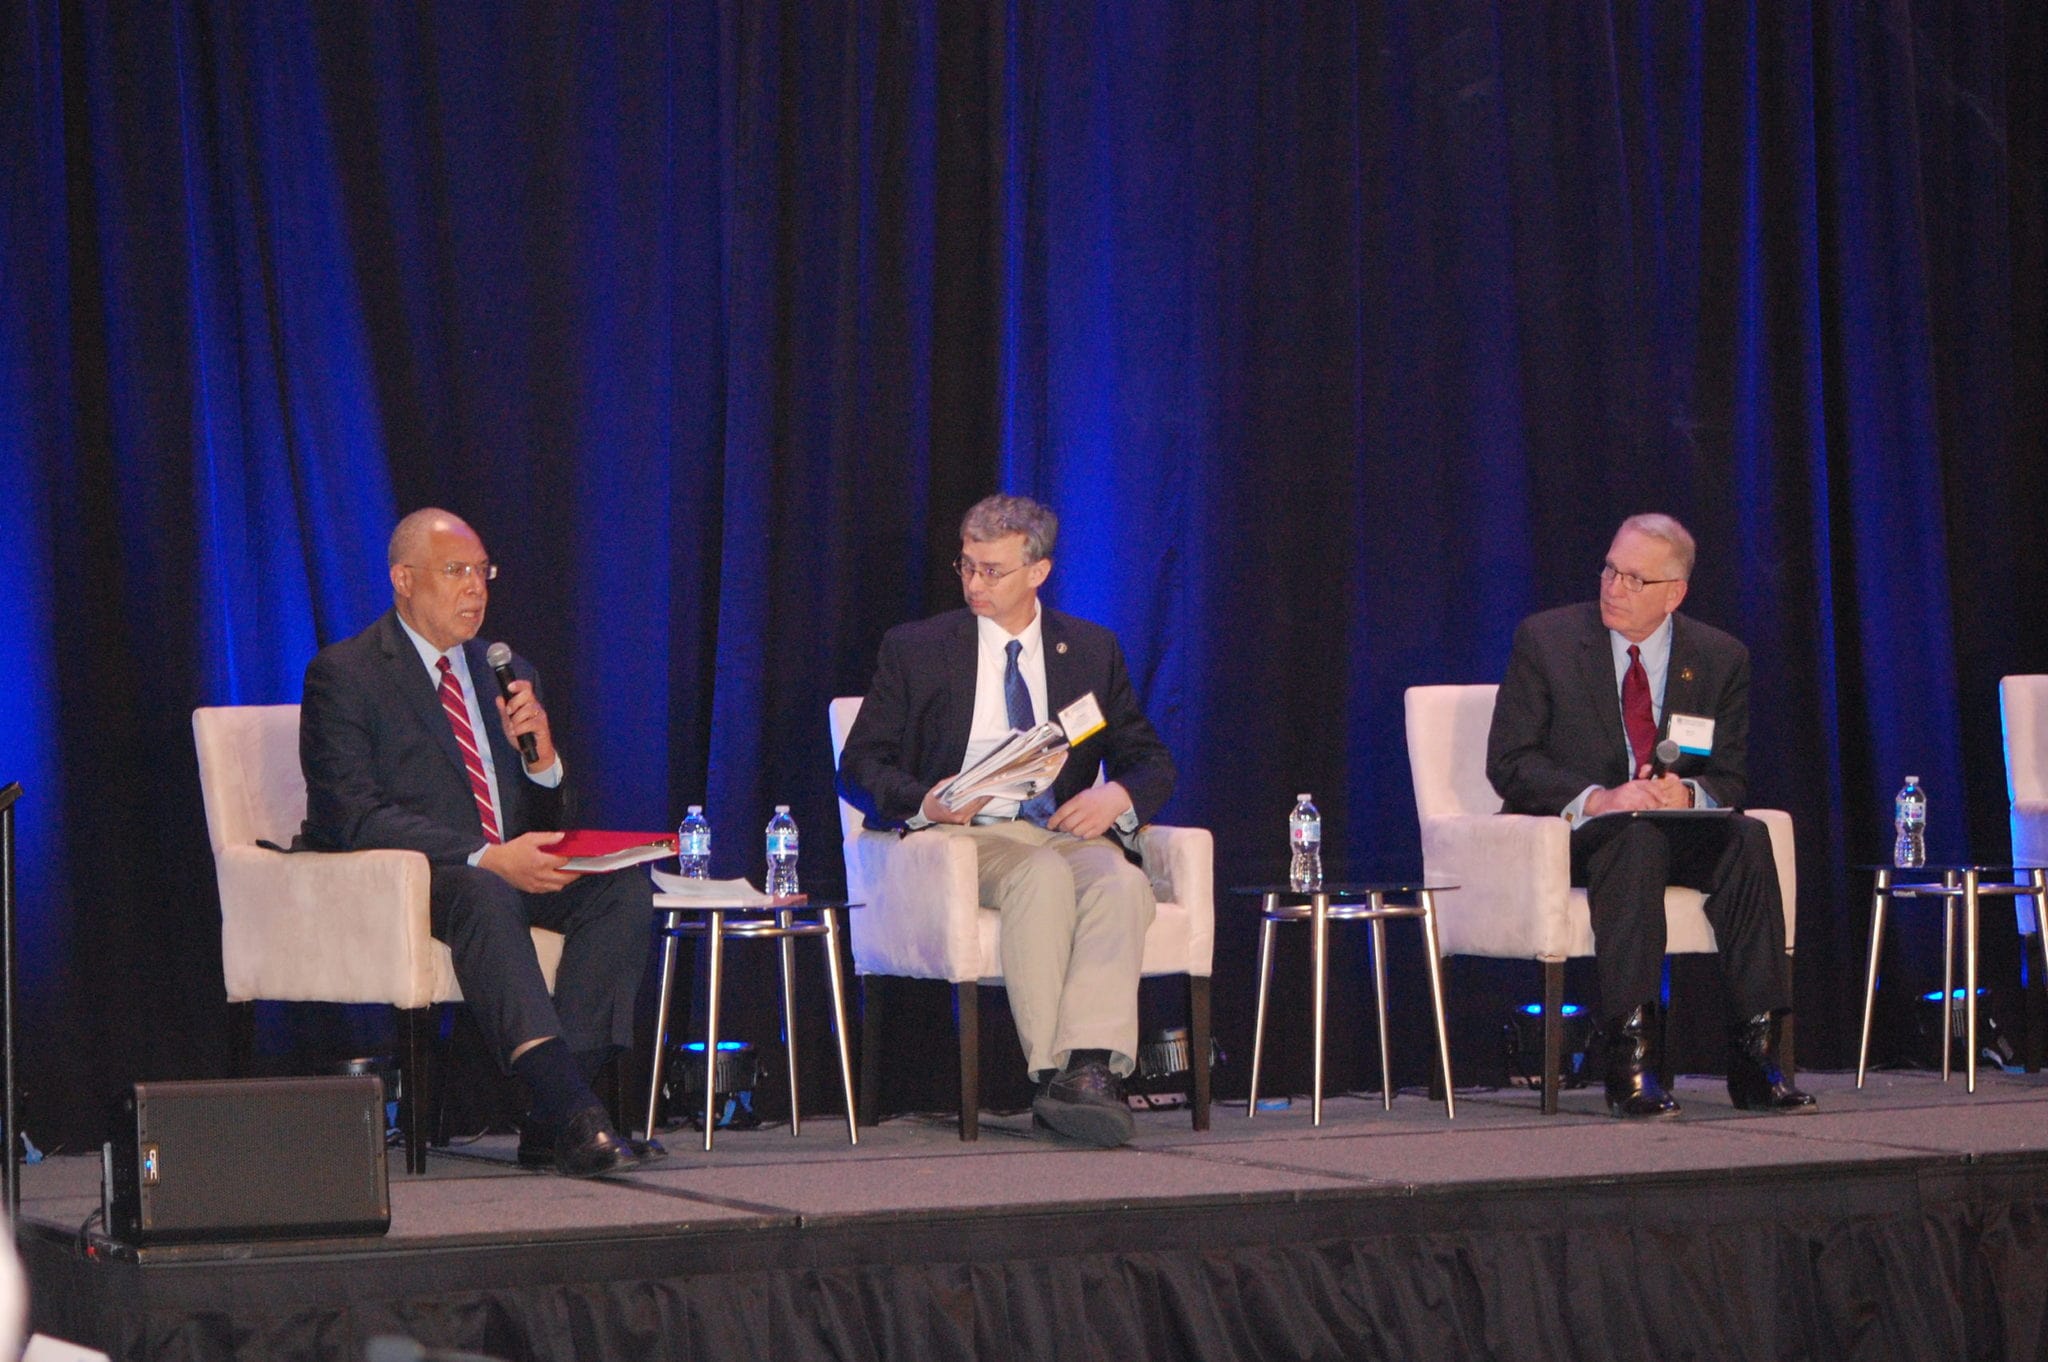 A panel of speakers at the 2019 Winter Meeting